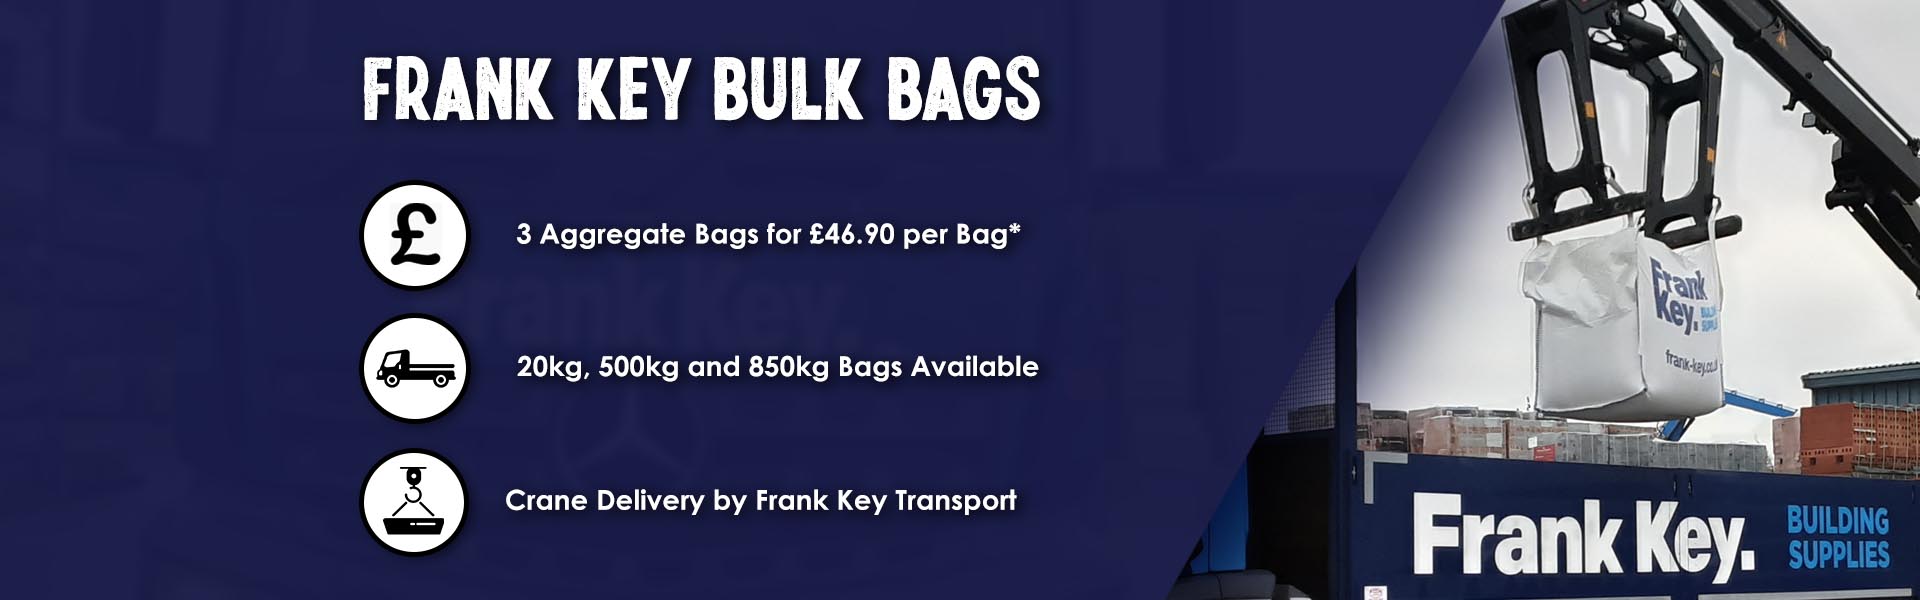 Frank Key bulk bags next working day delivery curbside crane delivery 3 aggregates for £46.90 per bag